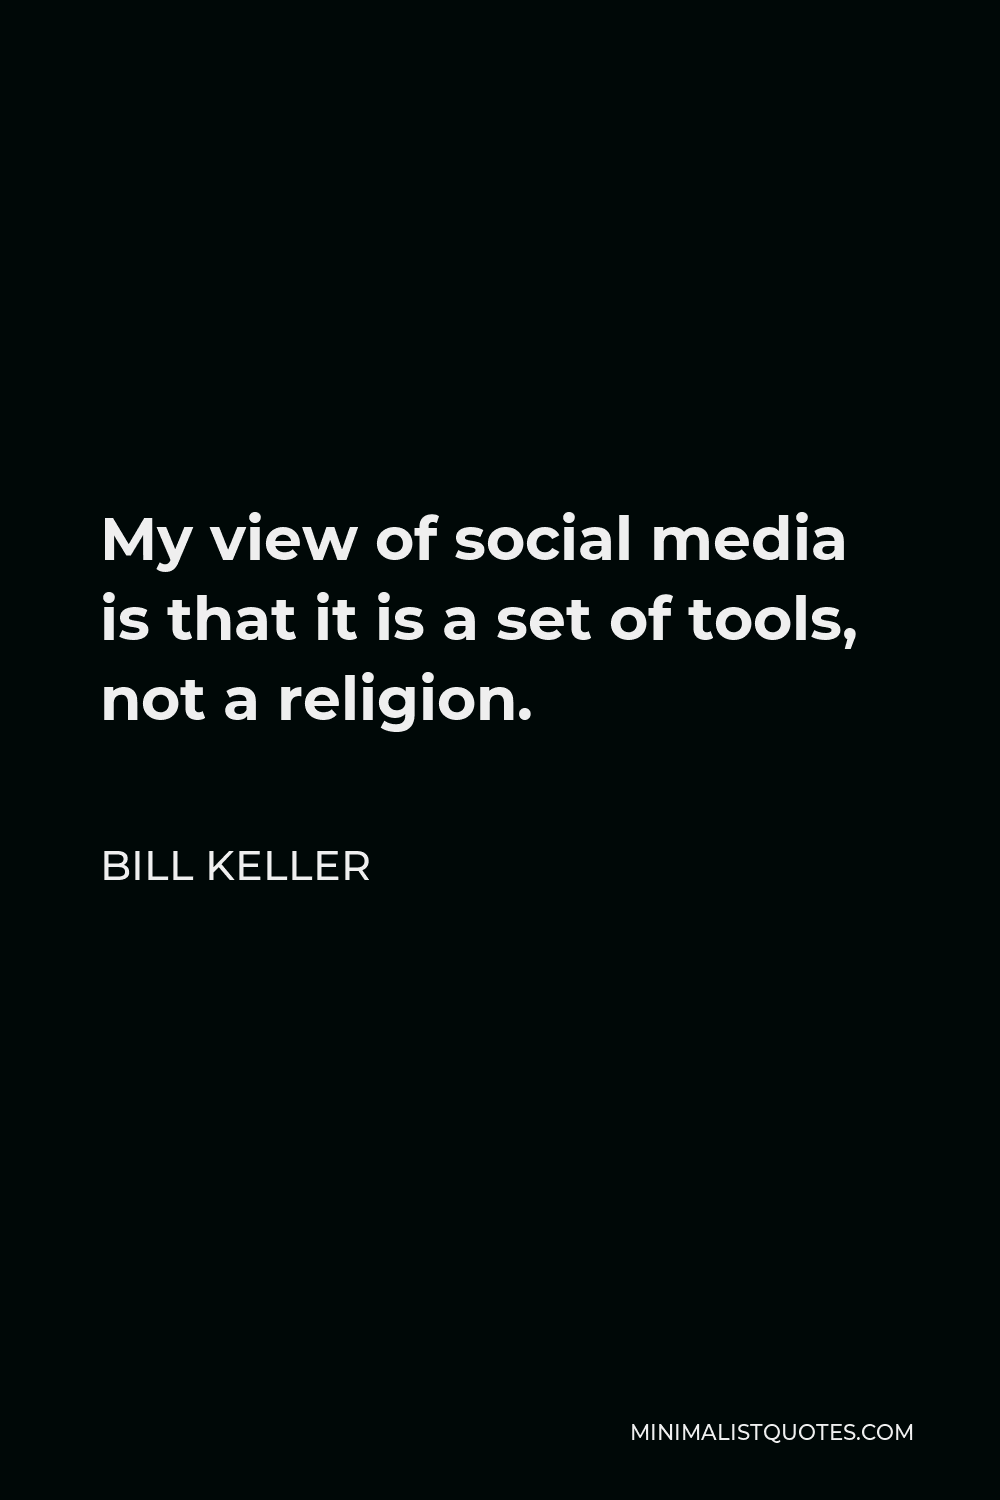 Bill Keller Quote - My view of social media is that it is a set of tools, not a religion.